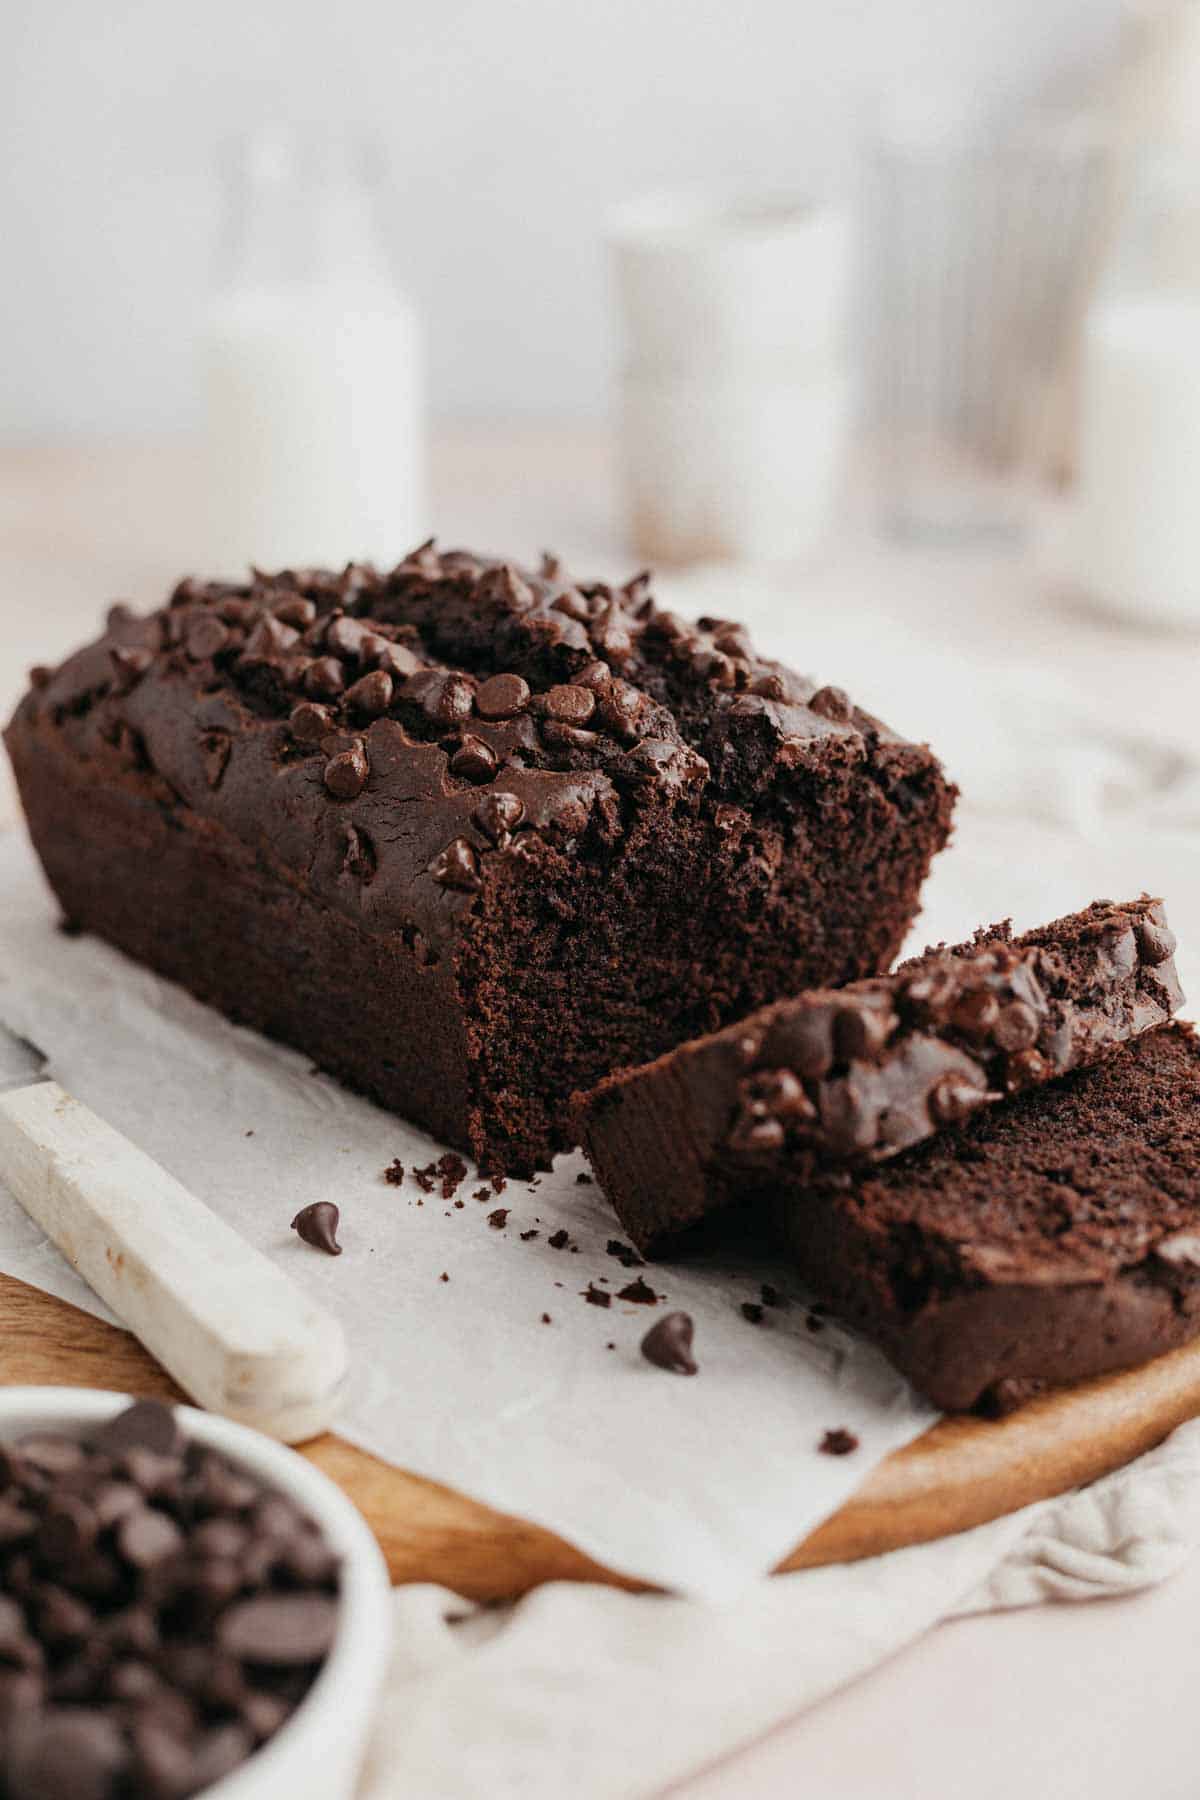 A chocolate pound cake covered with chocolate chips on parchment paper, 2 slices have been cut.